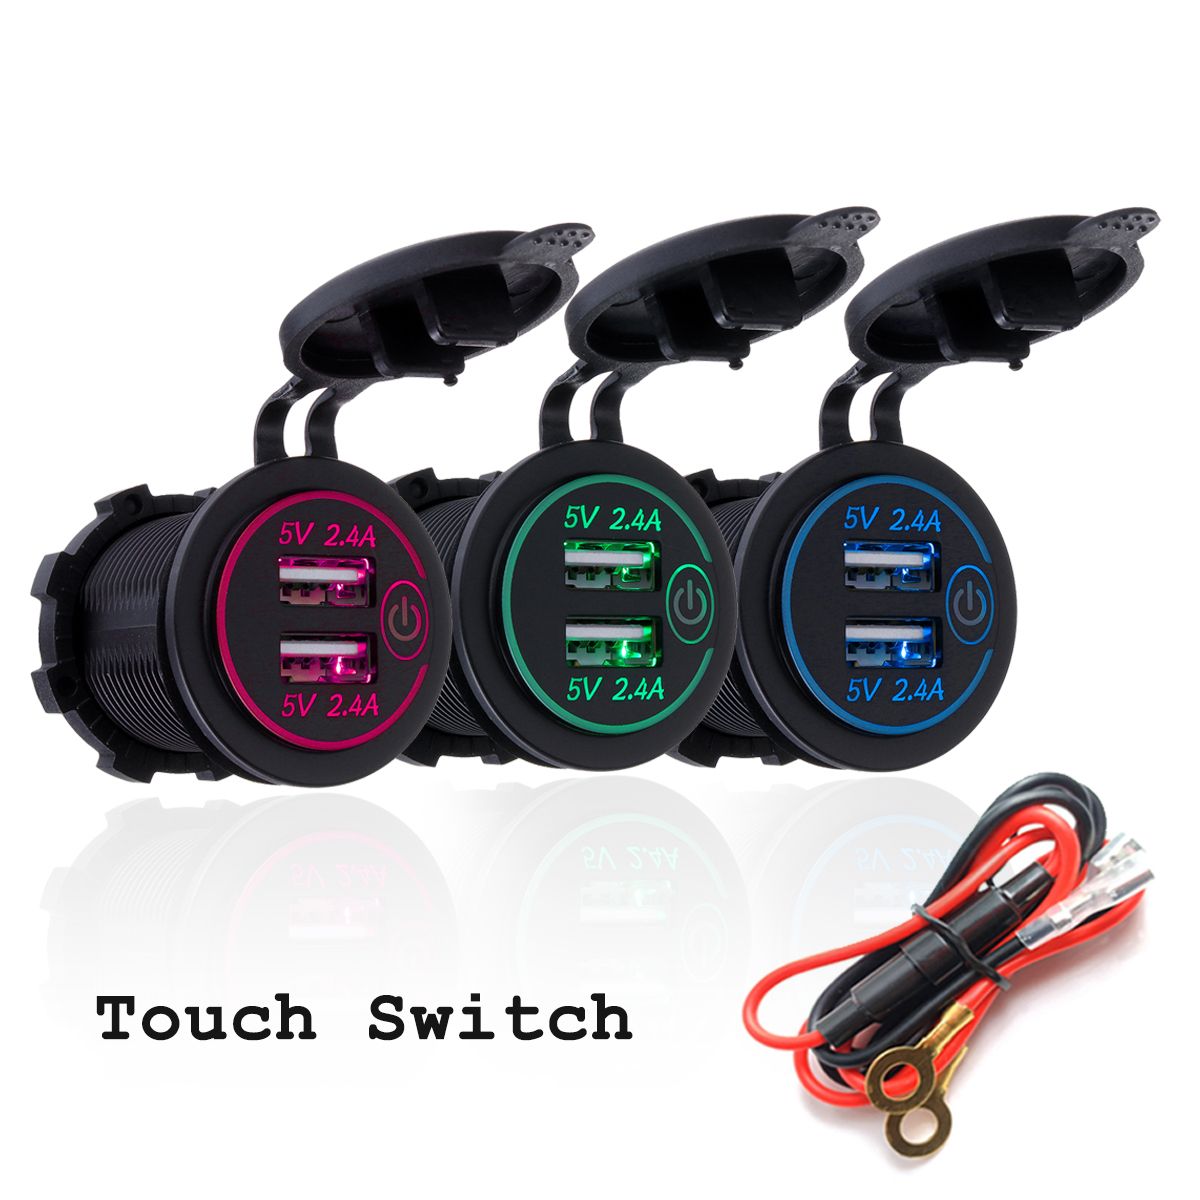 P18-S-Touch-Switch-with-Power-Cord-24A24A-Dual-USB-Car-Motorized-BoatModified-Charger-Phone-12-24V-1534305